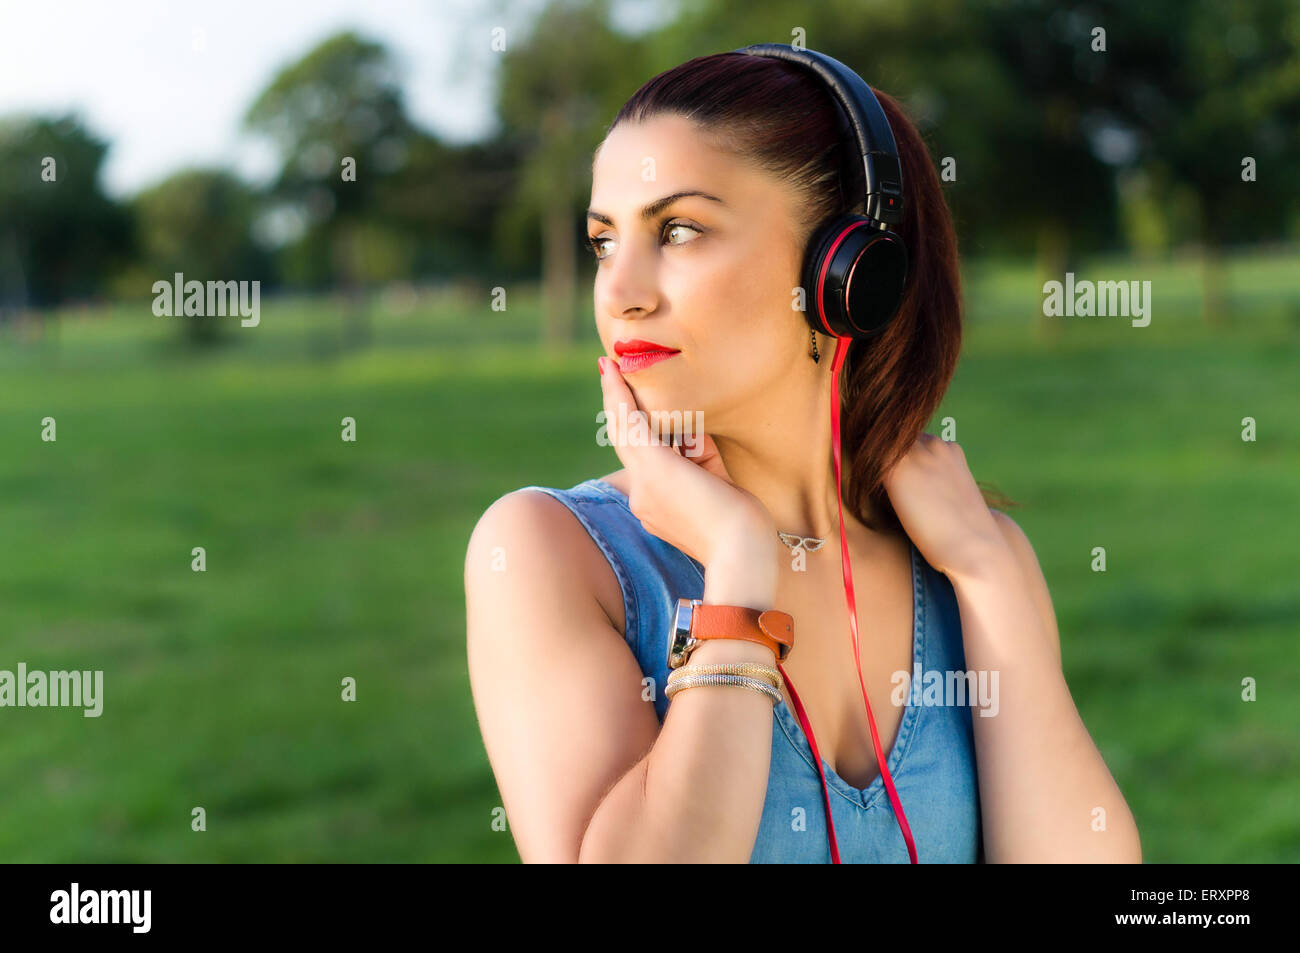 Woman with Headphones in the Park Looking Away Stock Photo